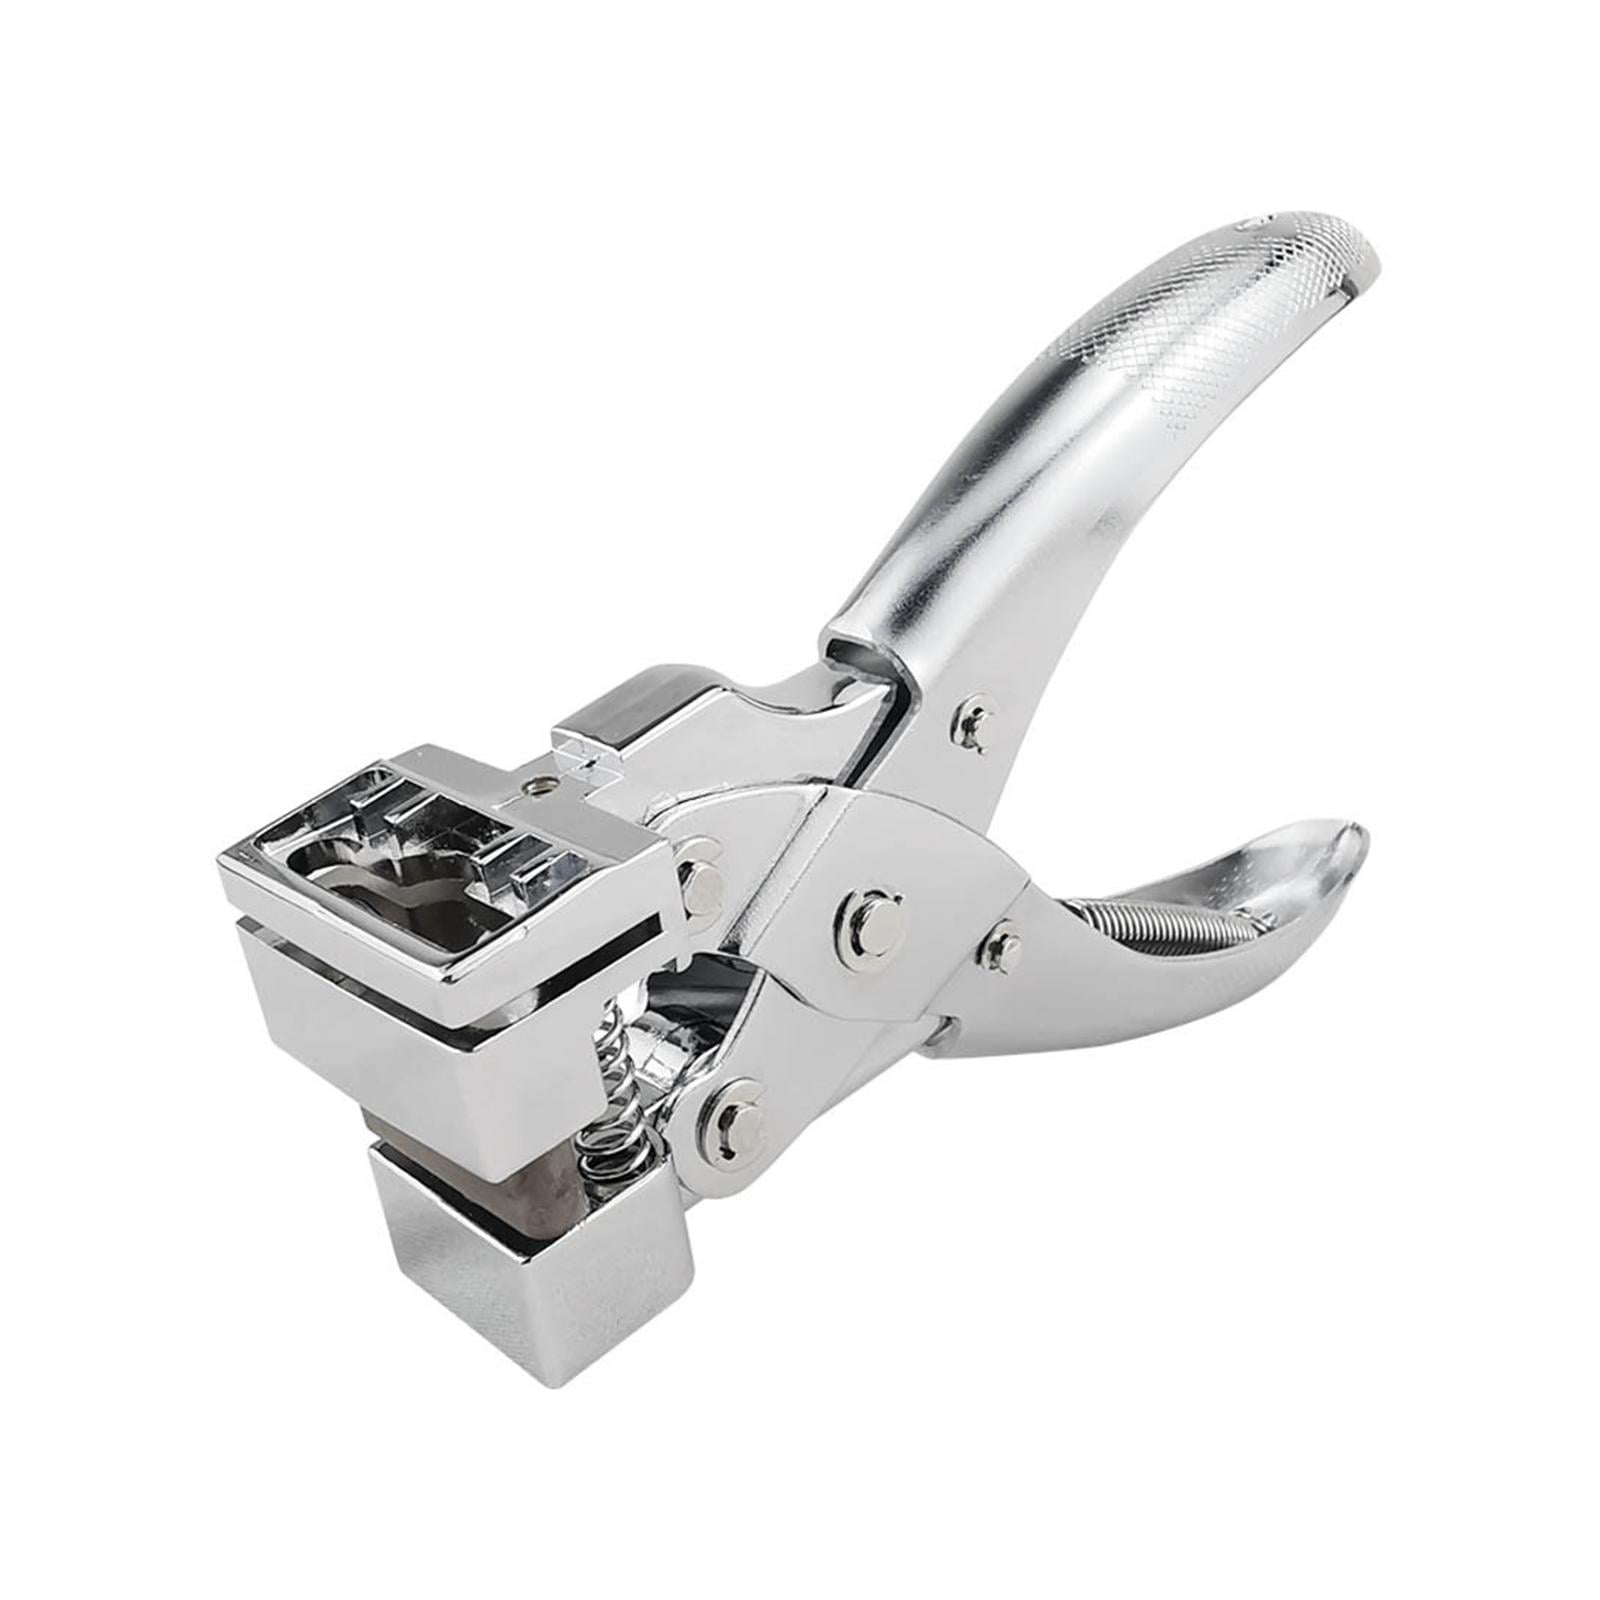 Slot Hole Punch,Portable Handheld Hole Puncher Heavy Duty,T Slot Hole Punch  Tool Paper Puncher Badge Holder,Badge Hole Punch Hook Clamp Pliers Kids  Adults,Home DIY Craft Handhed Punching Cards 